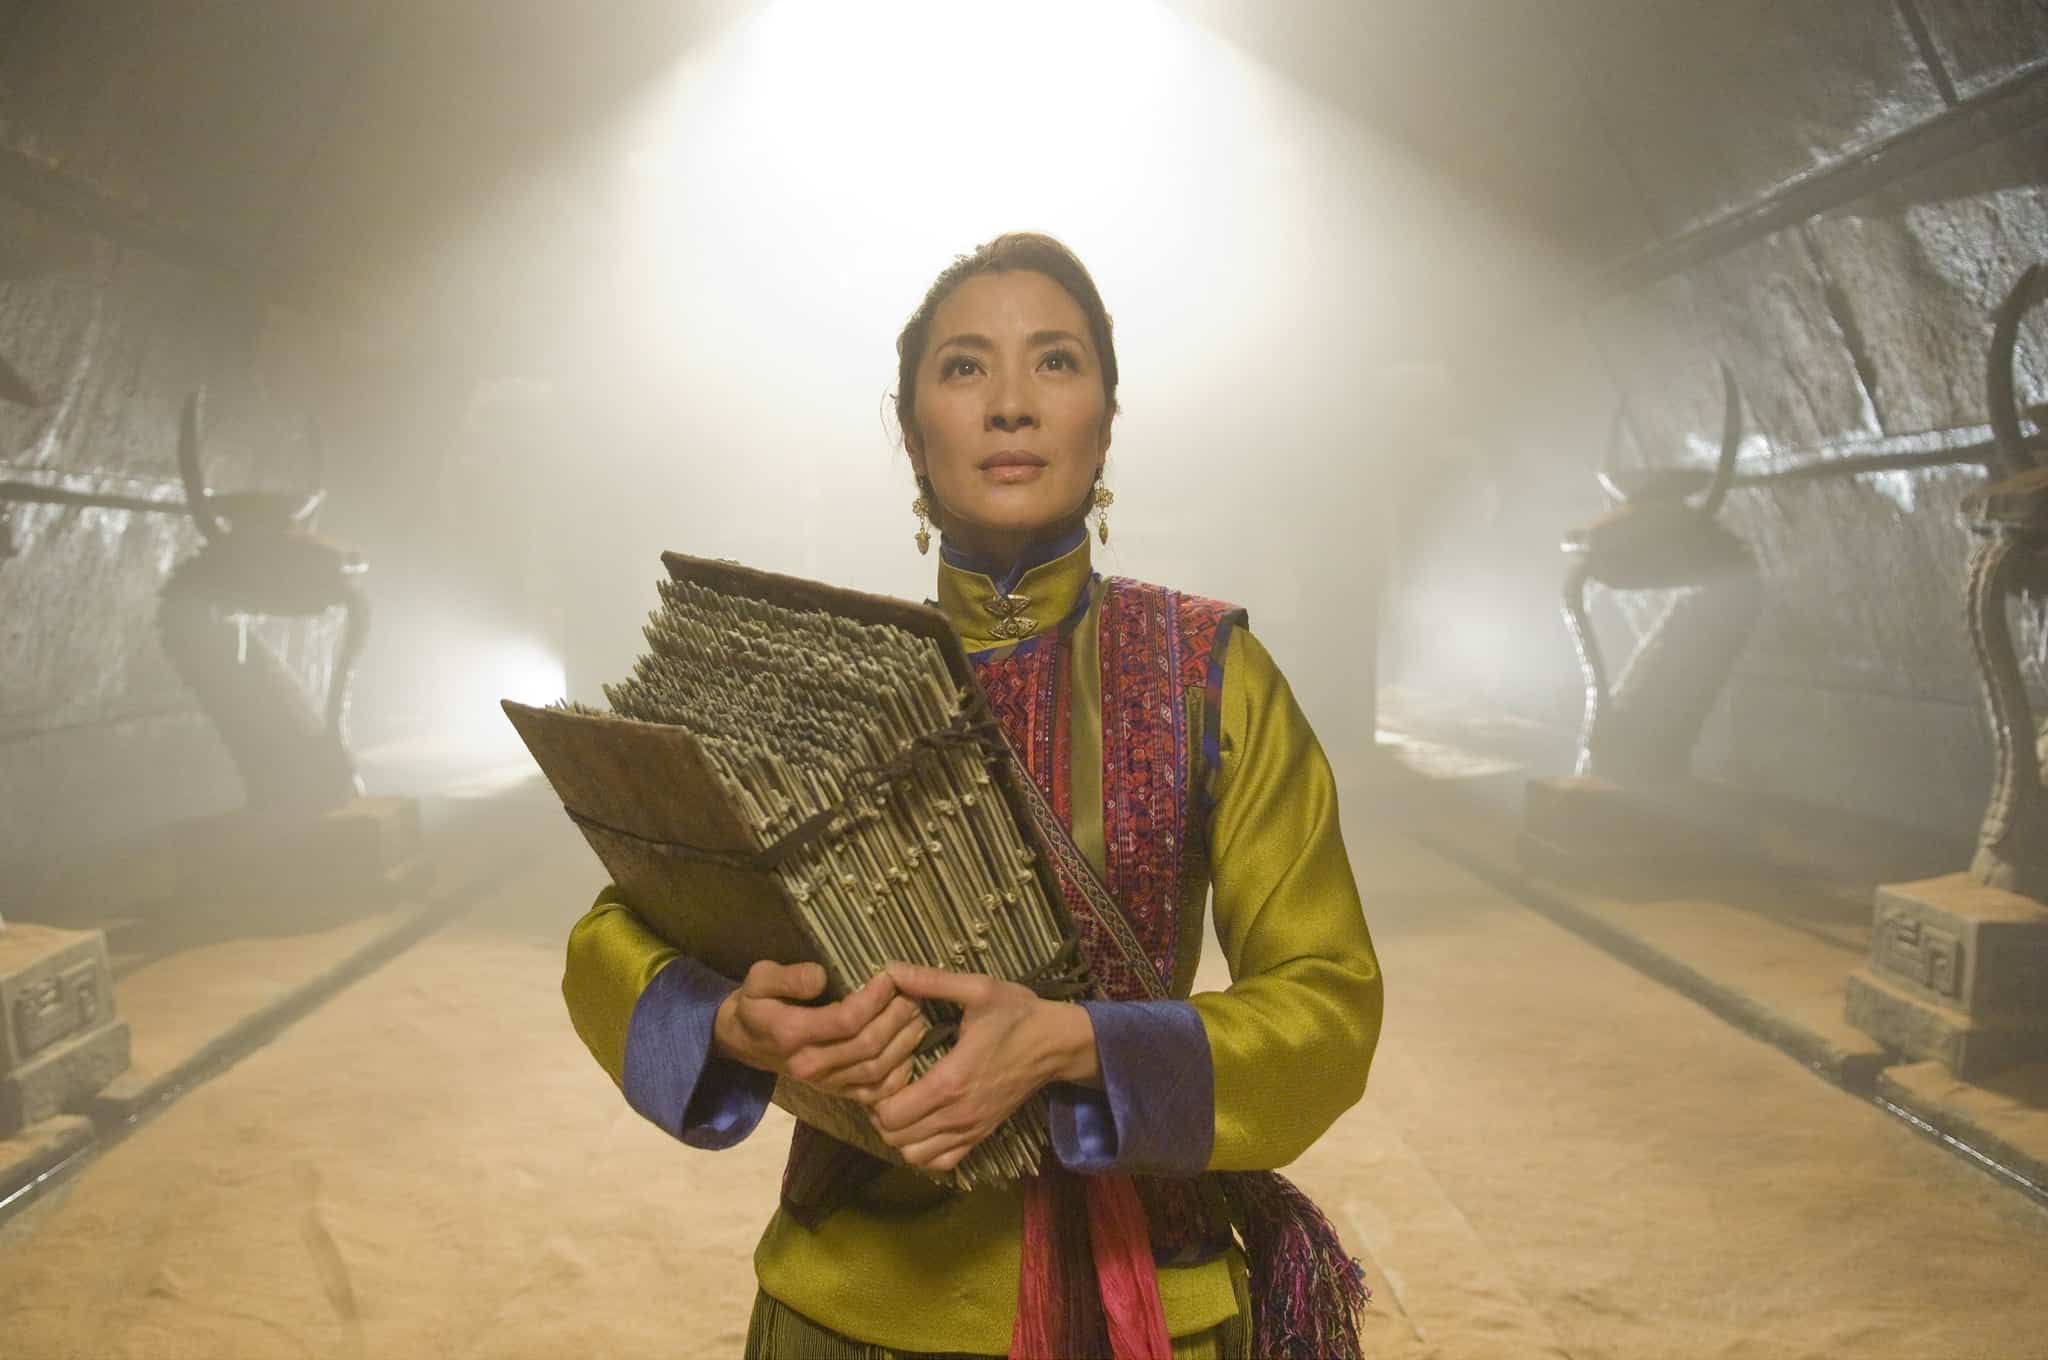 A woman carries a stack of old books in this image from Universal Pictures.